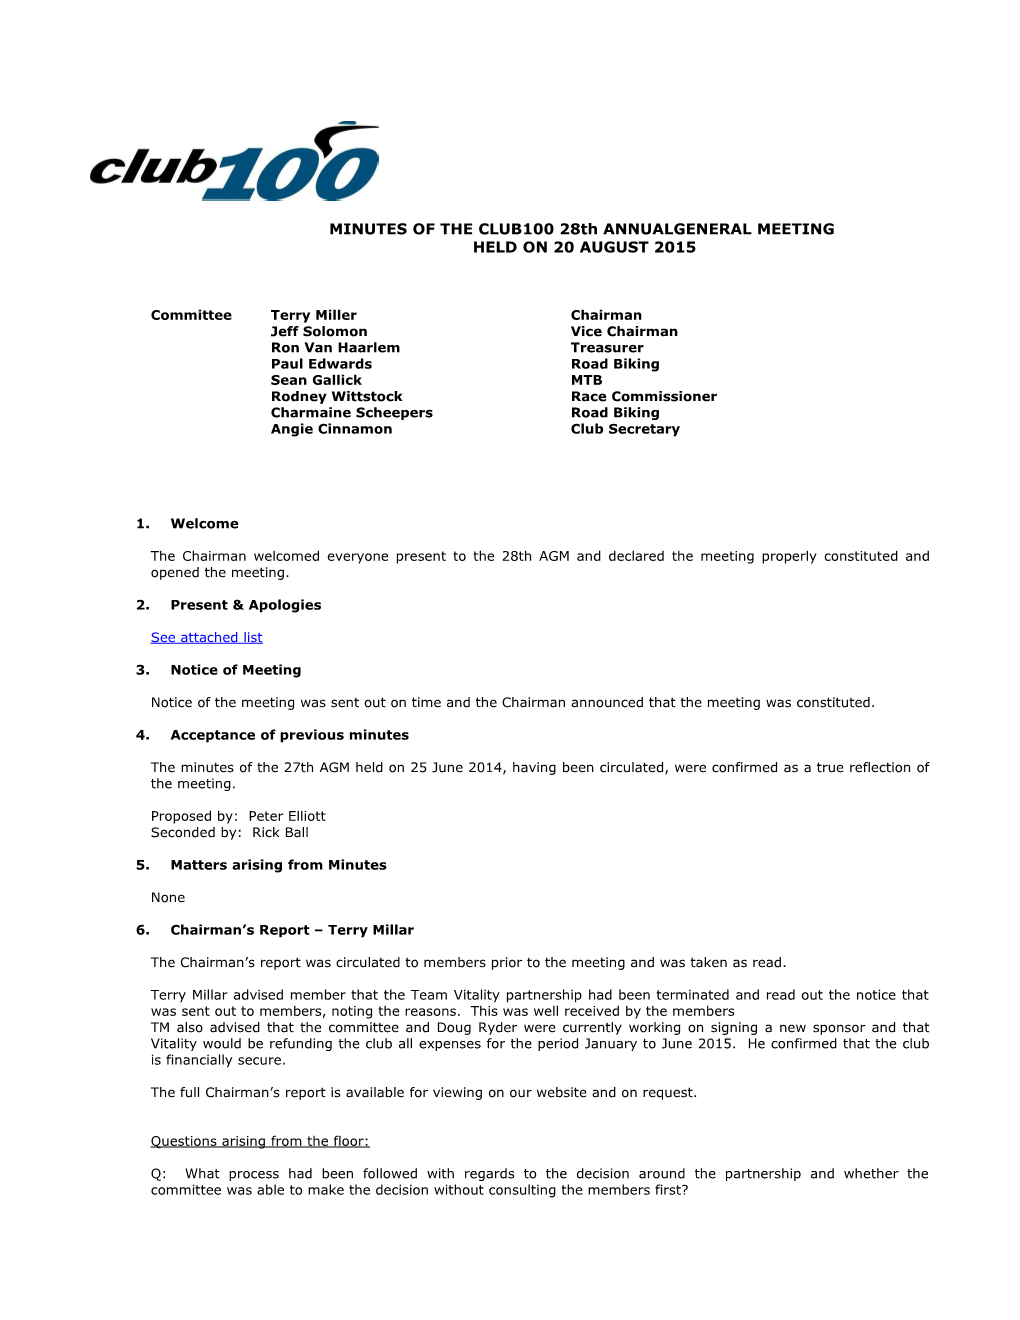 MINUTES of the CLUB100 28Thannualgeneral MEETING